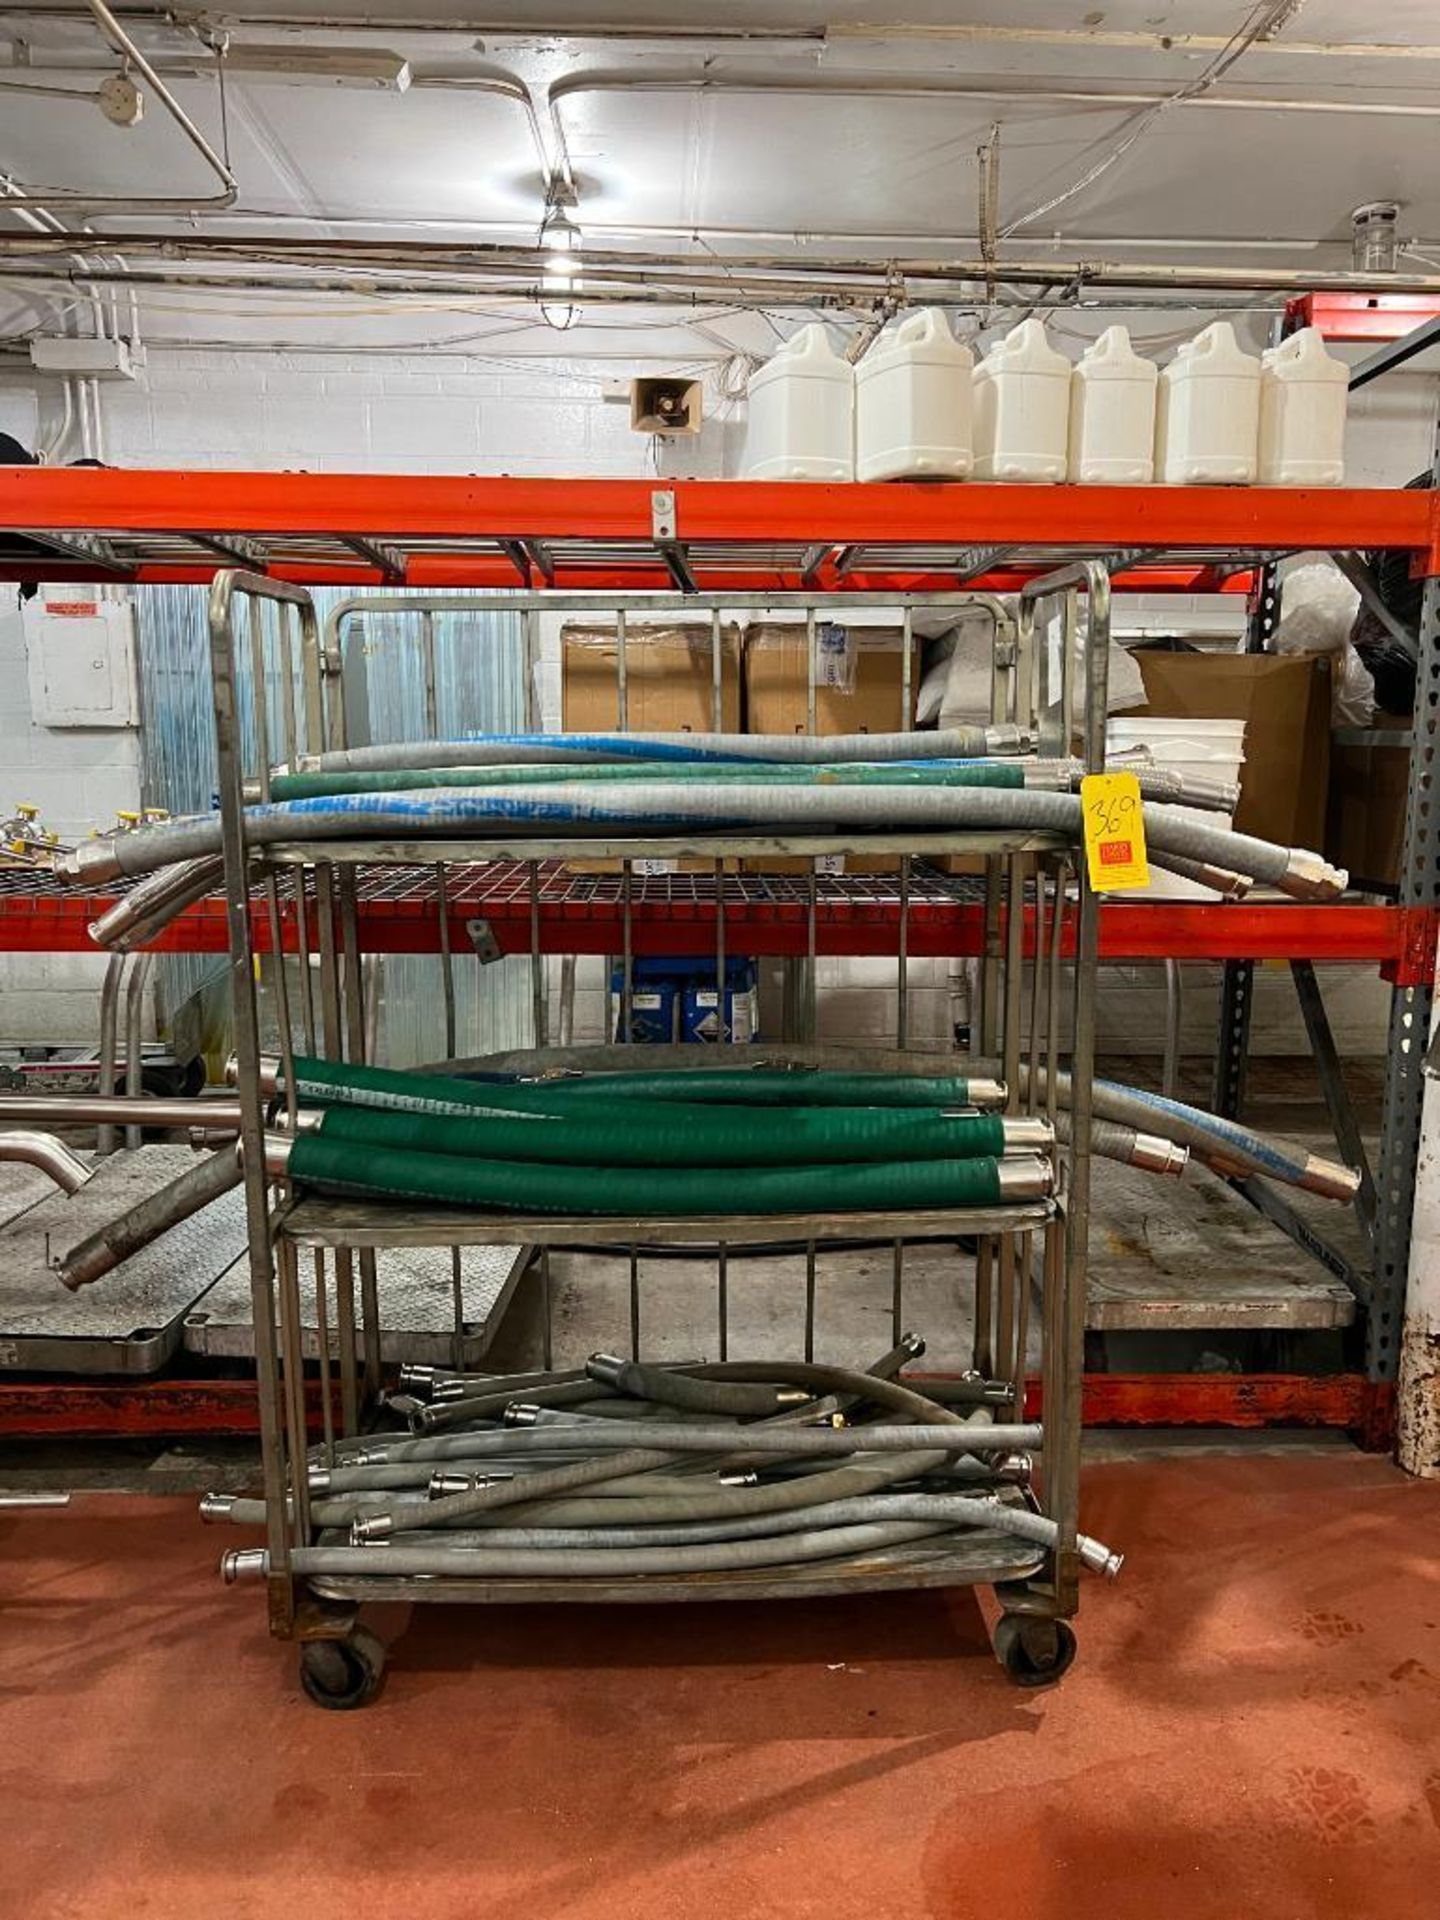 Assorted Suction/Discharge Hoses and Bossie Cart - Rigging Fee: $125